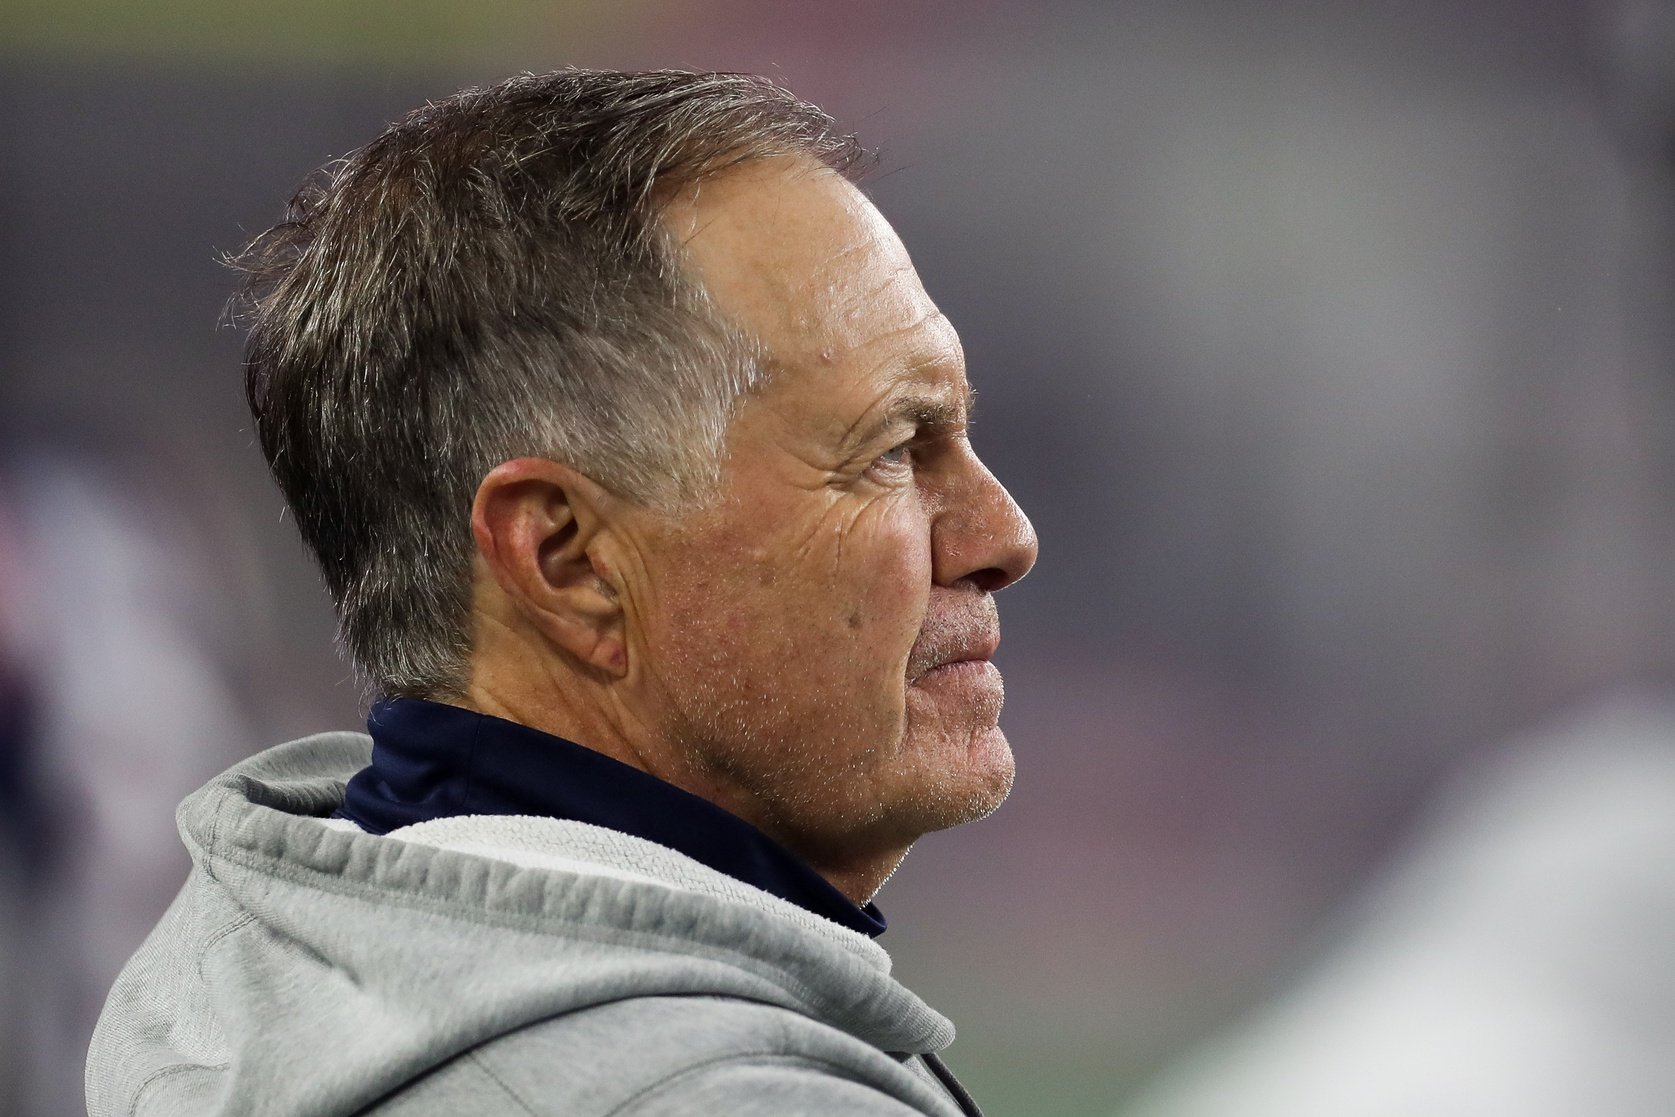 A photo of New England Patriots Head Coach Bill Belichick from the side view